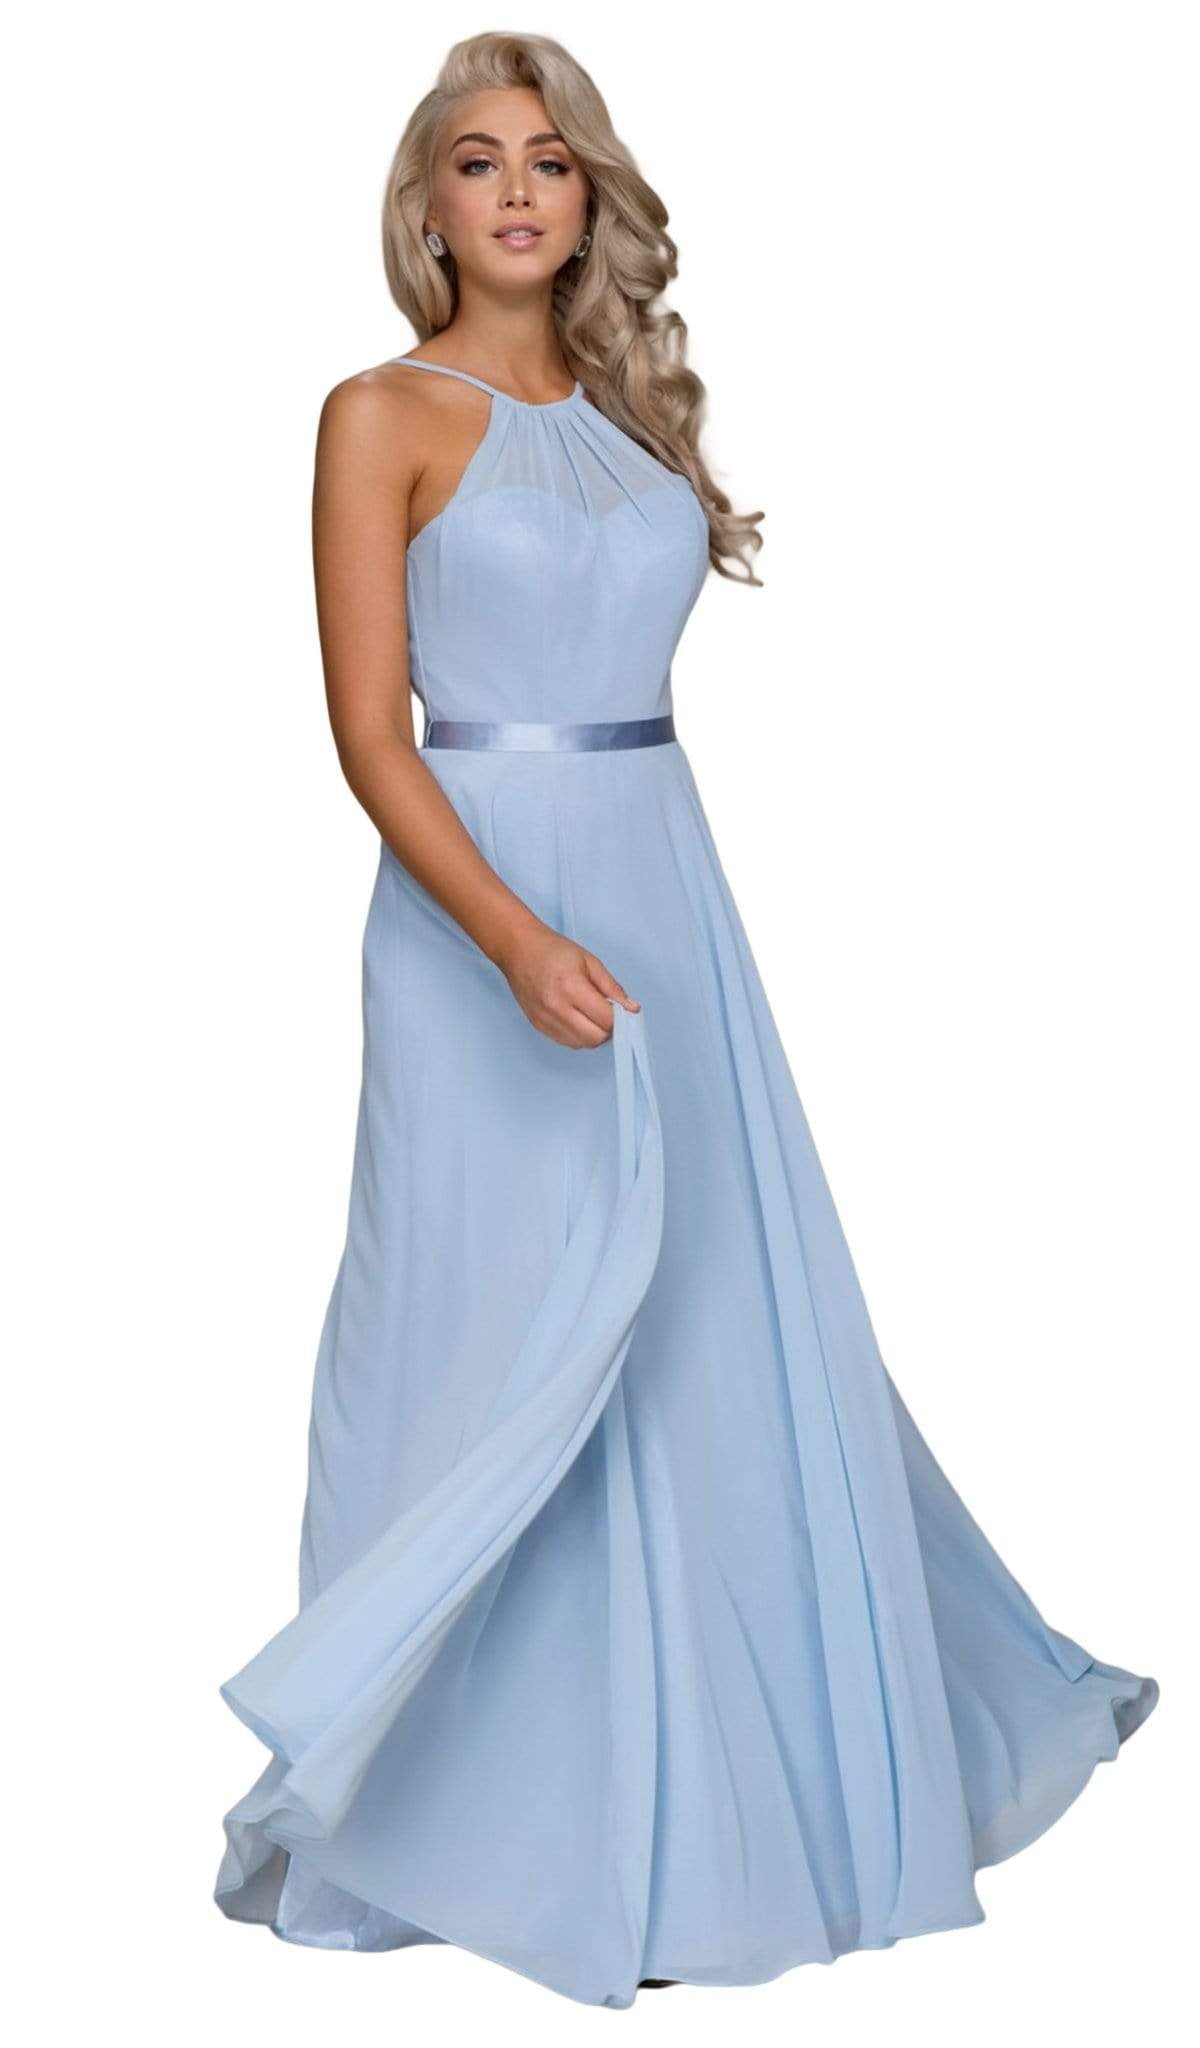 Nox Anabel - Y102P Sleeveless Halter Neck A-line Dress Special Occasion Dress 4XL / Ice Blue